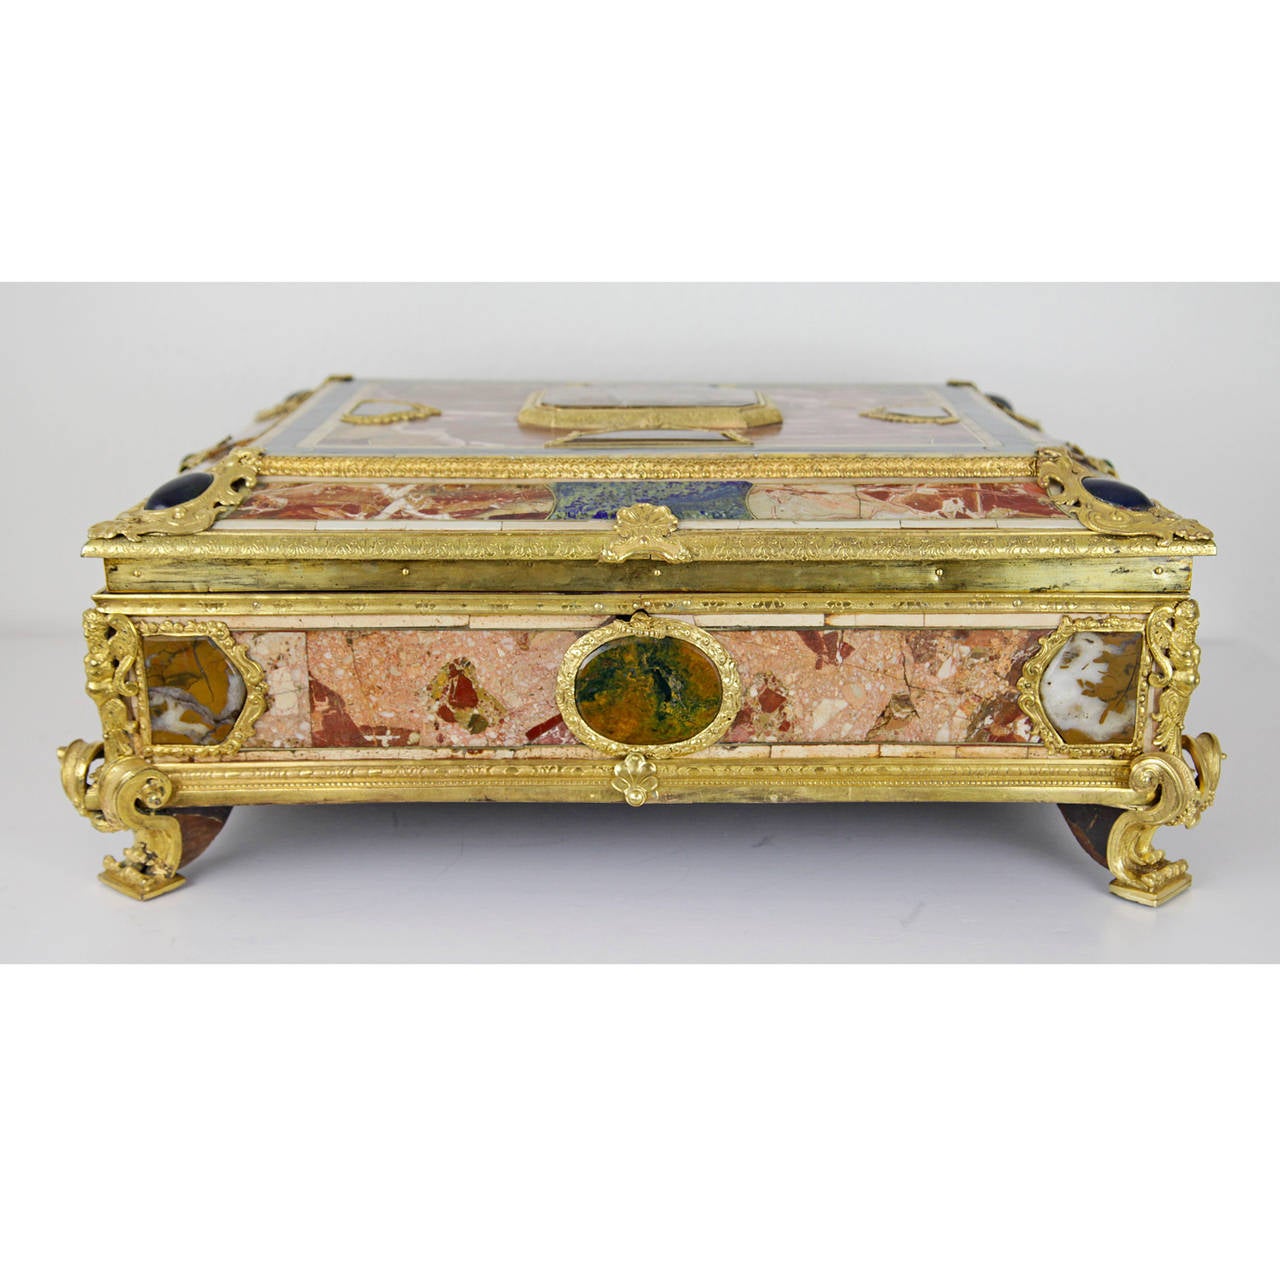 Stunning Document Casket with Marble and Semi-Precious Stones Occupied 1